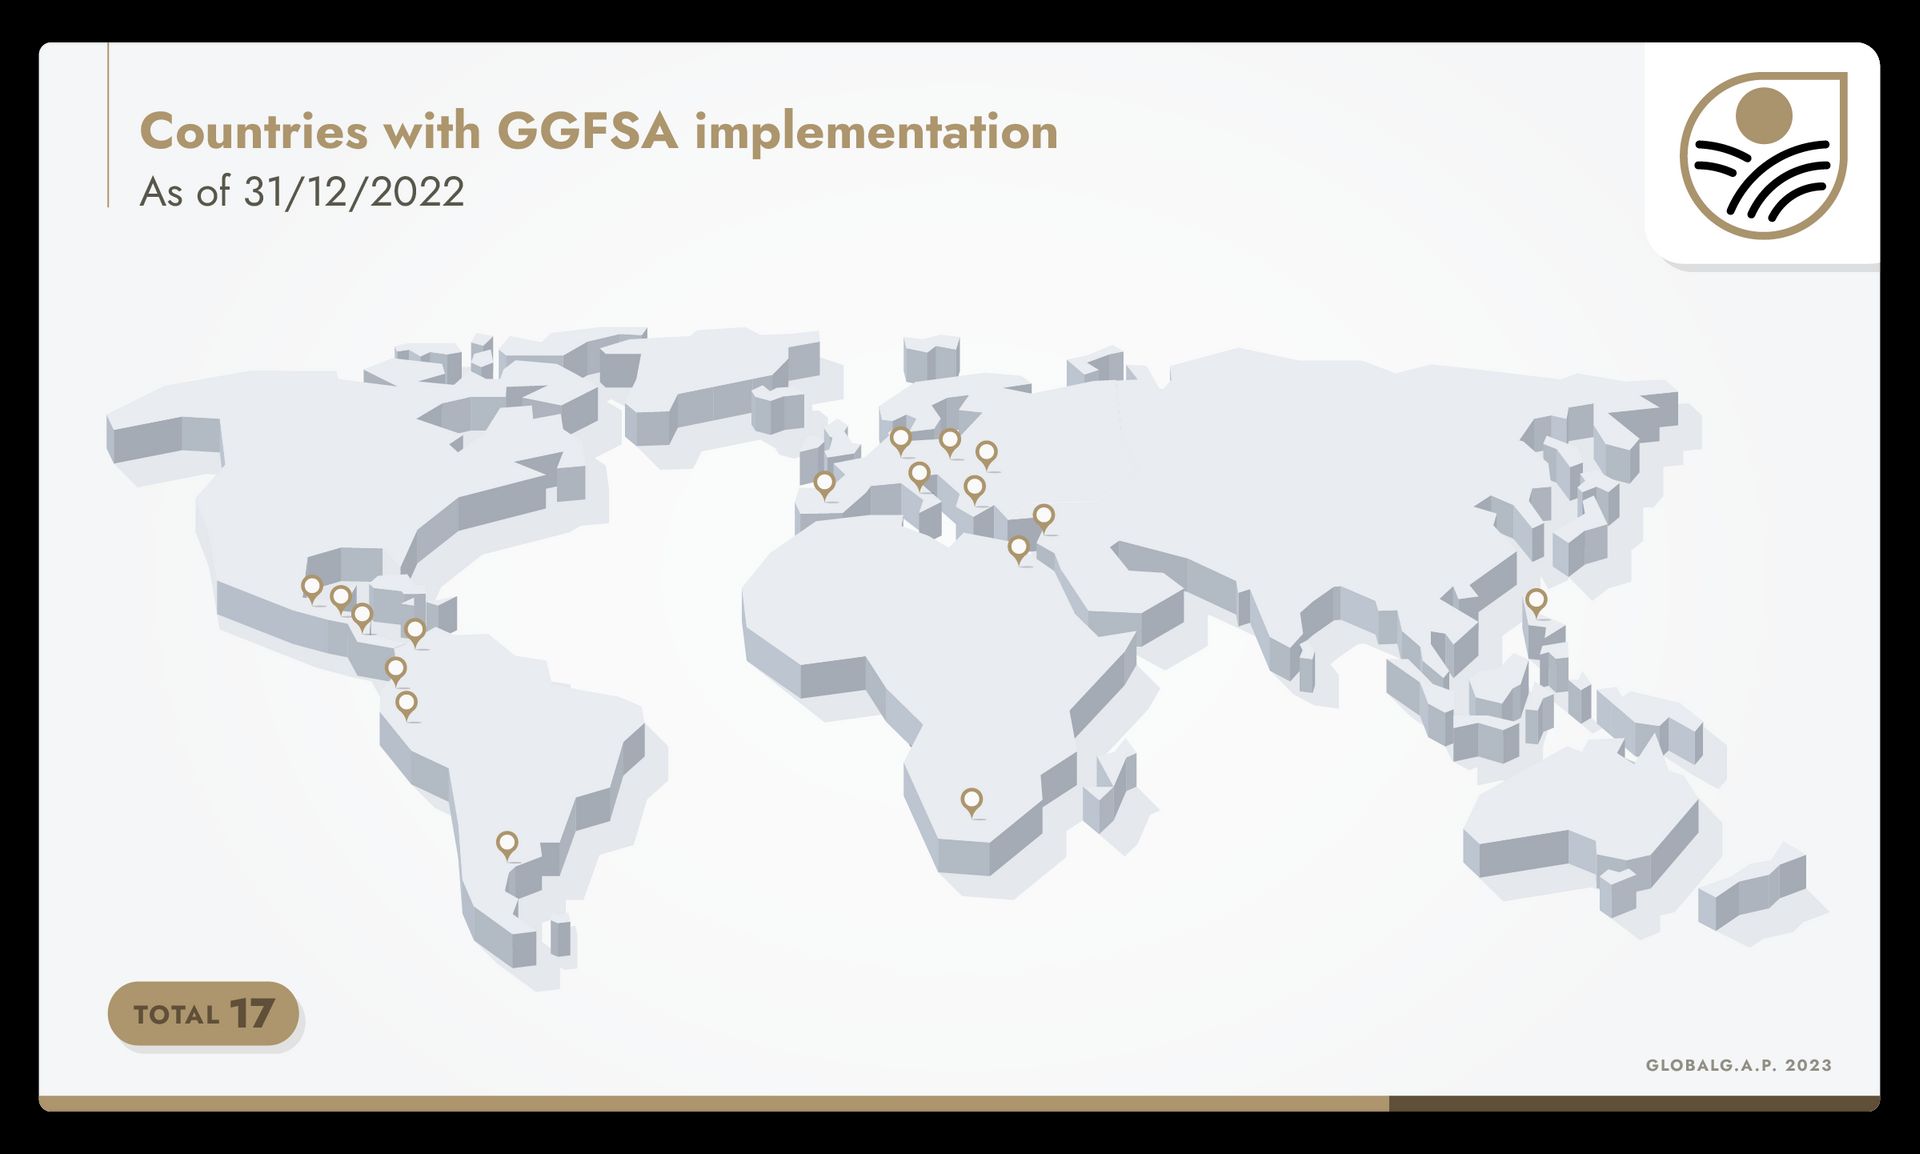 Infographic of a world map showing countries with GLOBALG.A.P. Farm Sustainability Assessment implementation